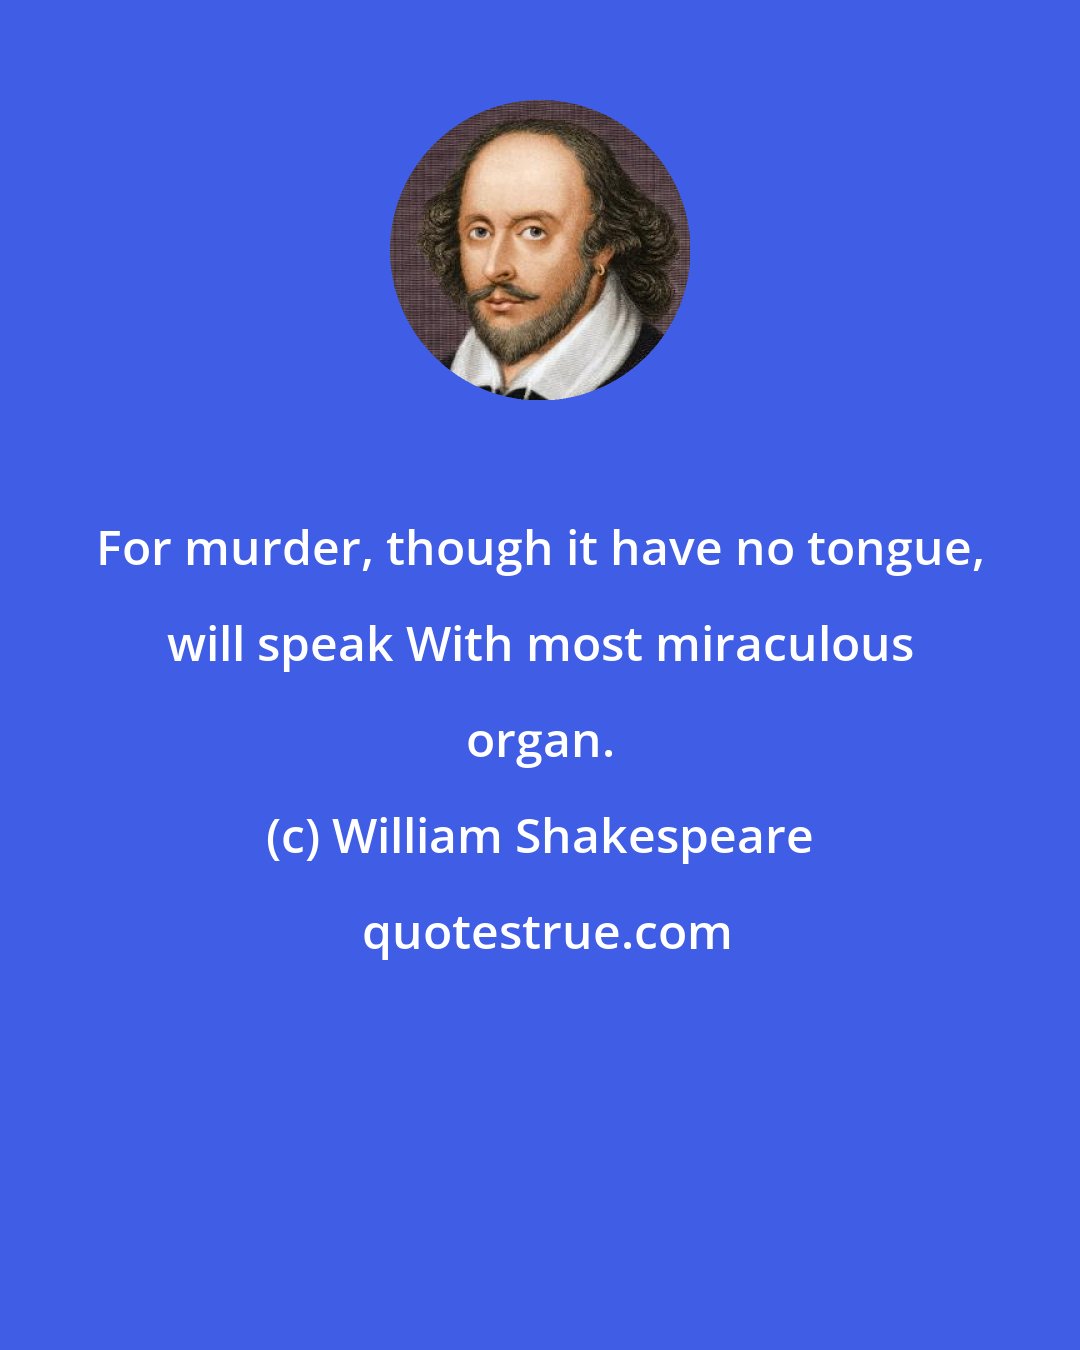 William Shakespeare: For murder, though it have no tongue, will speak With most miraculous organ.